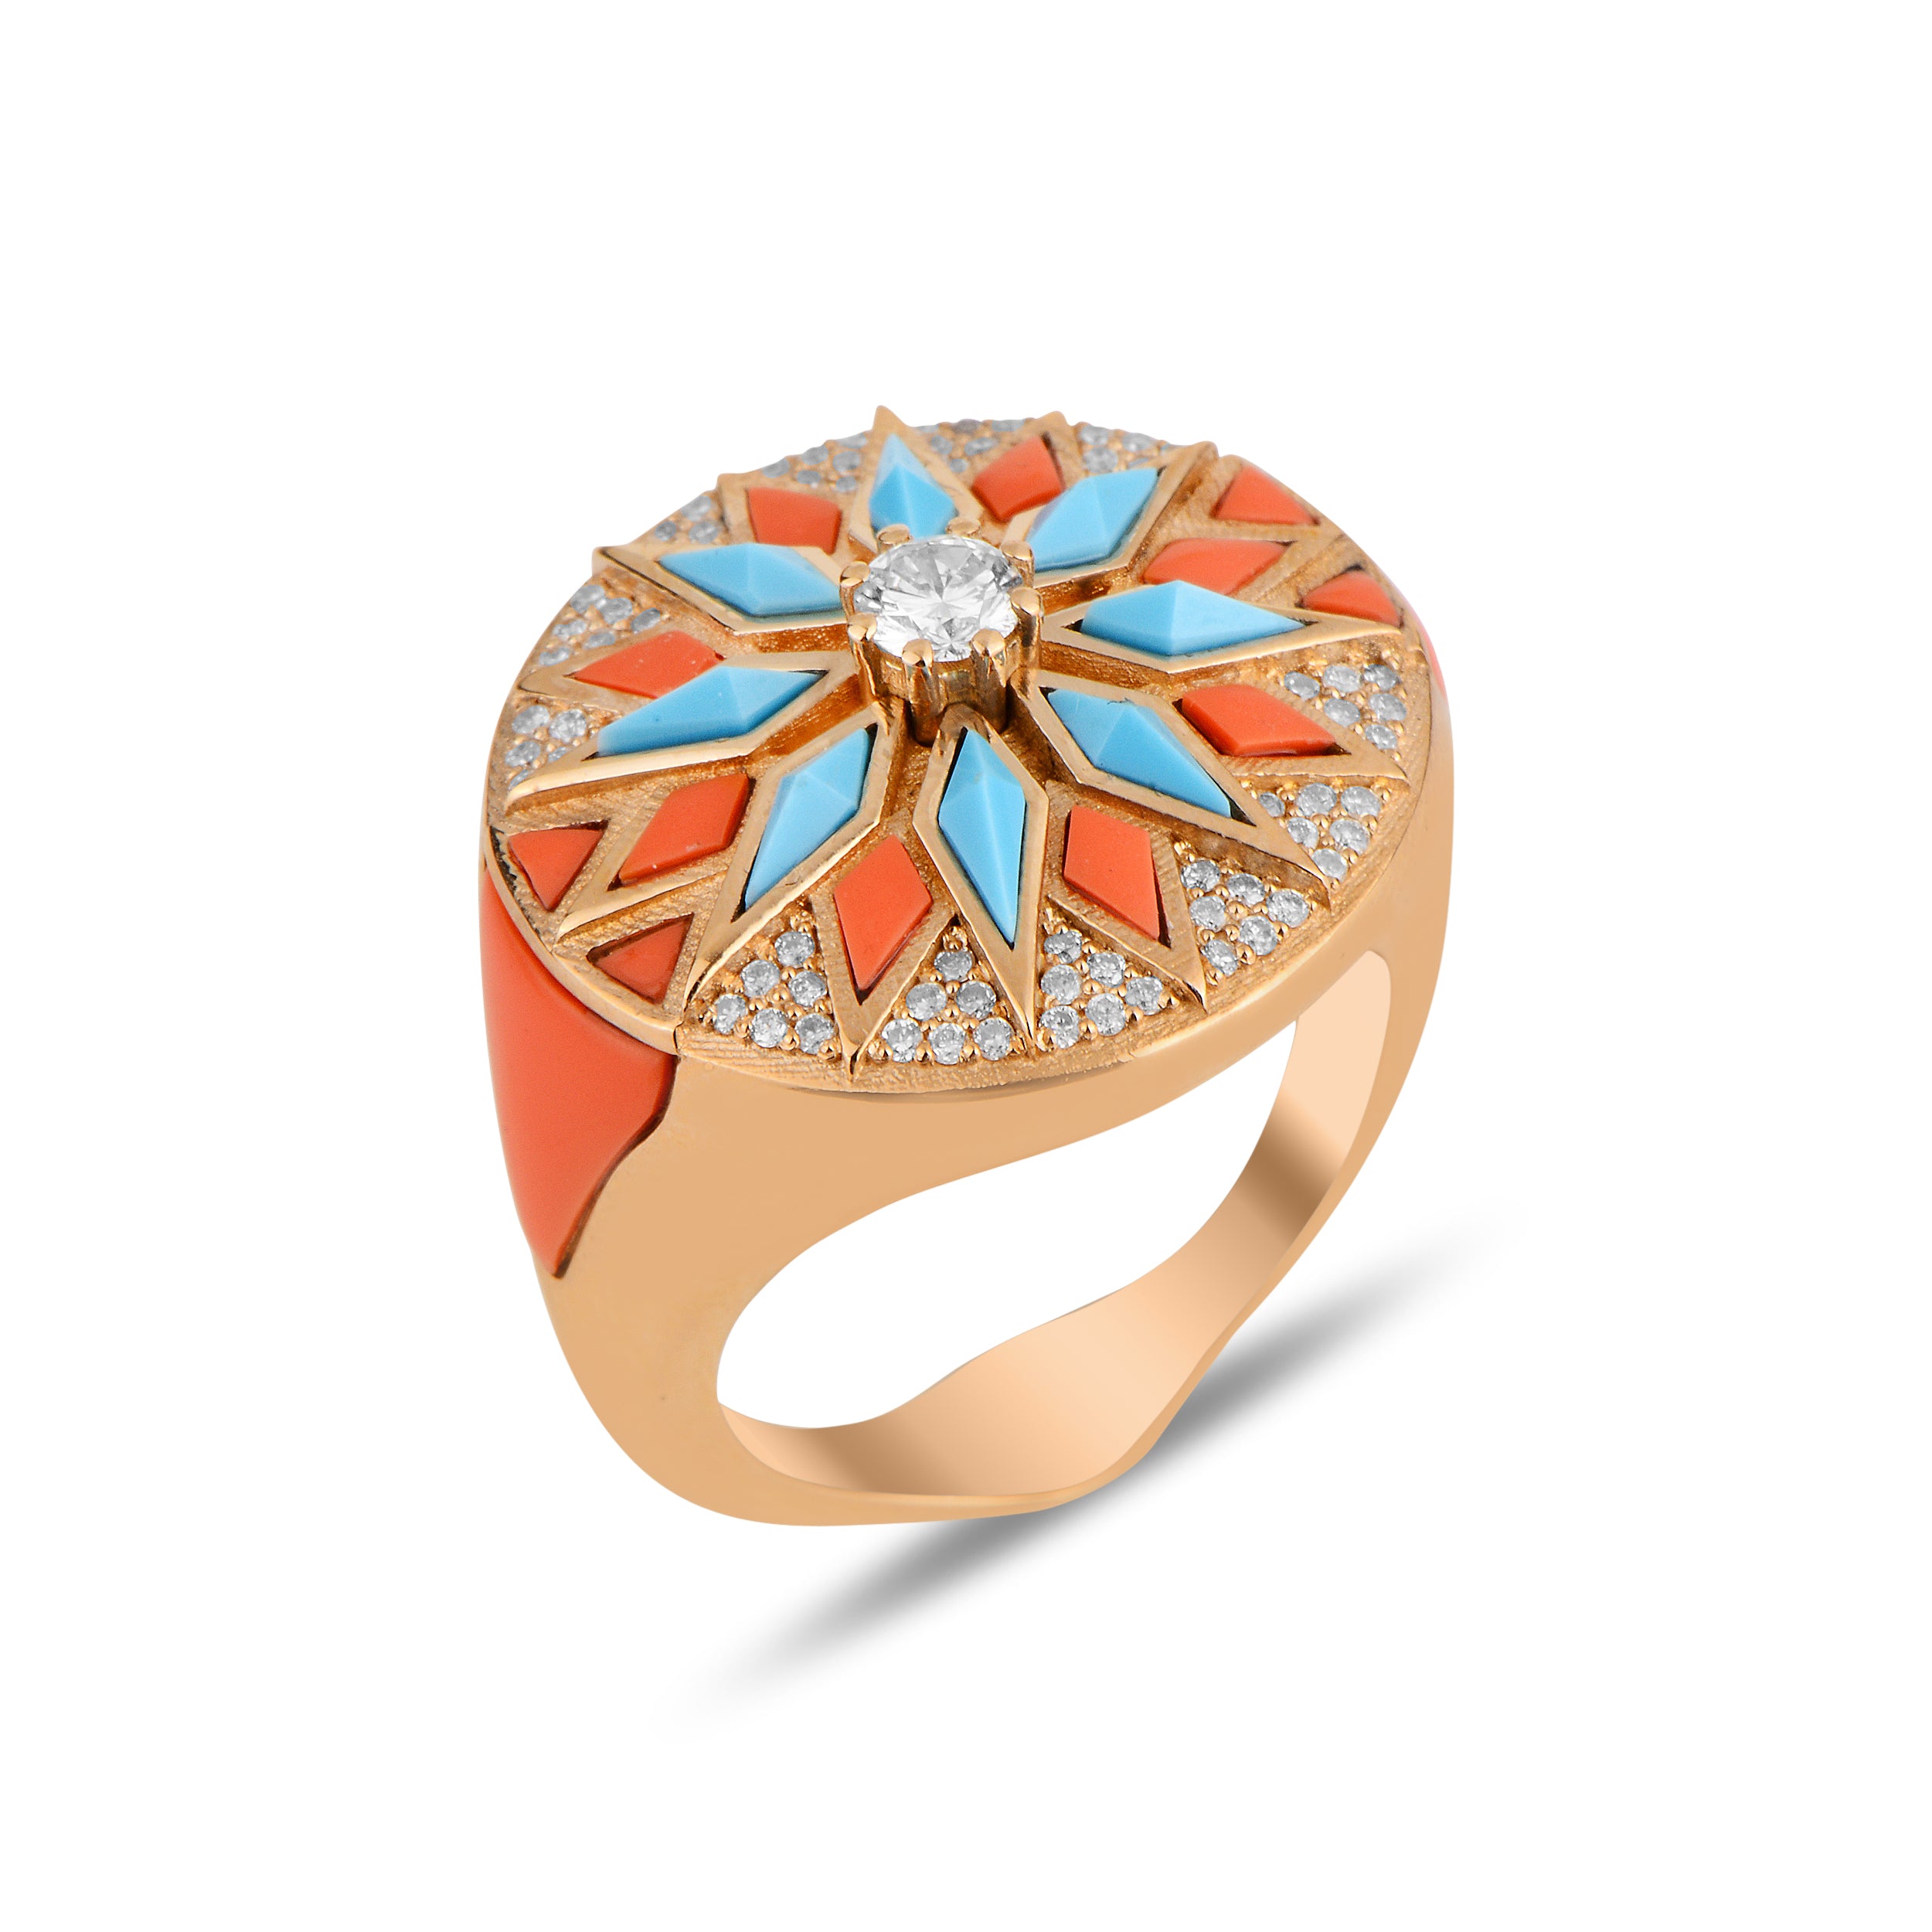 Nord Ring - Coral & Turquoise